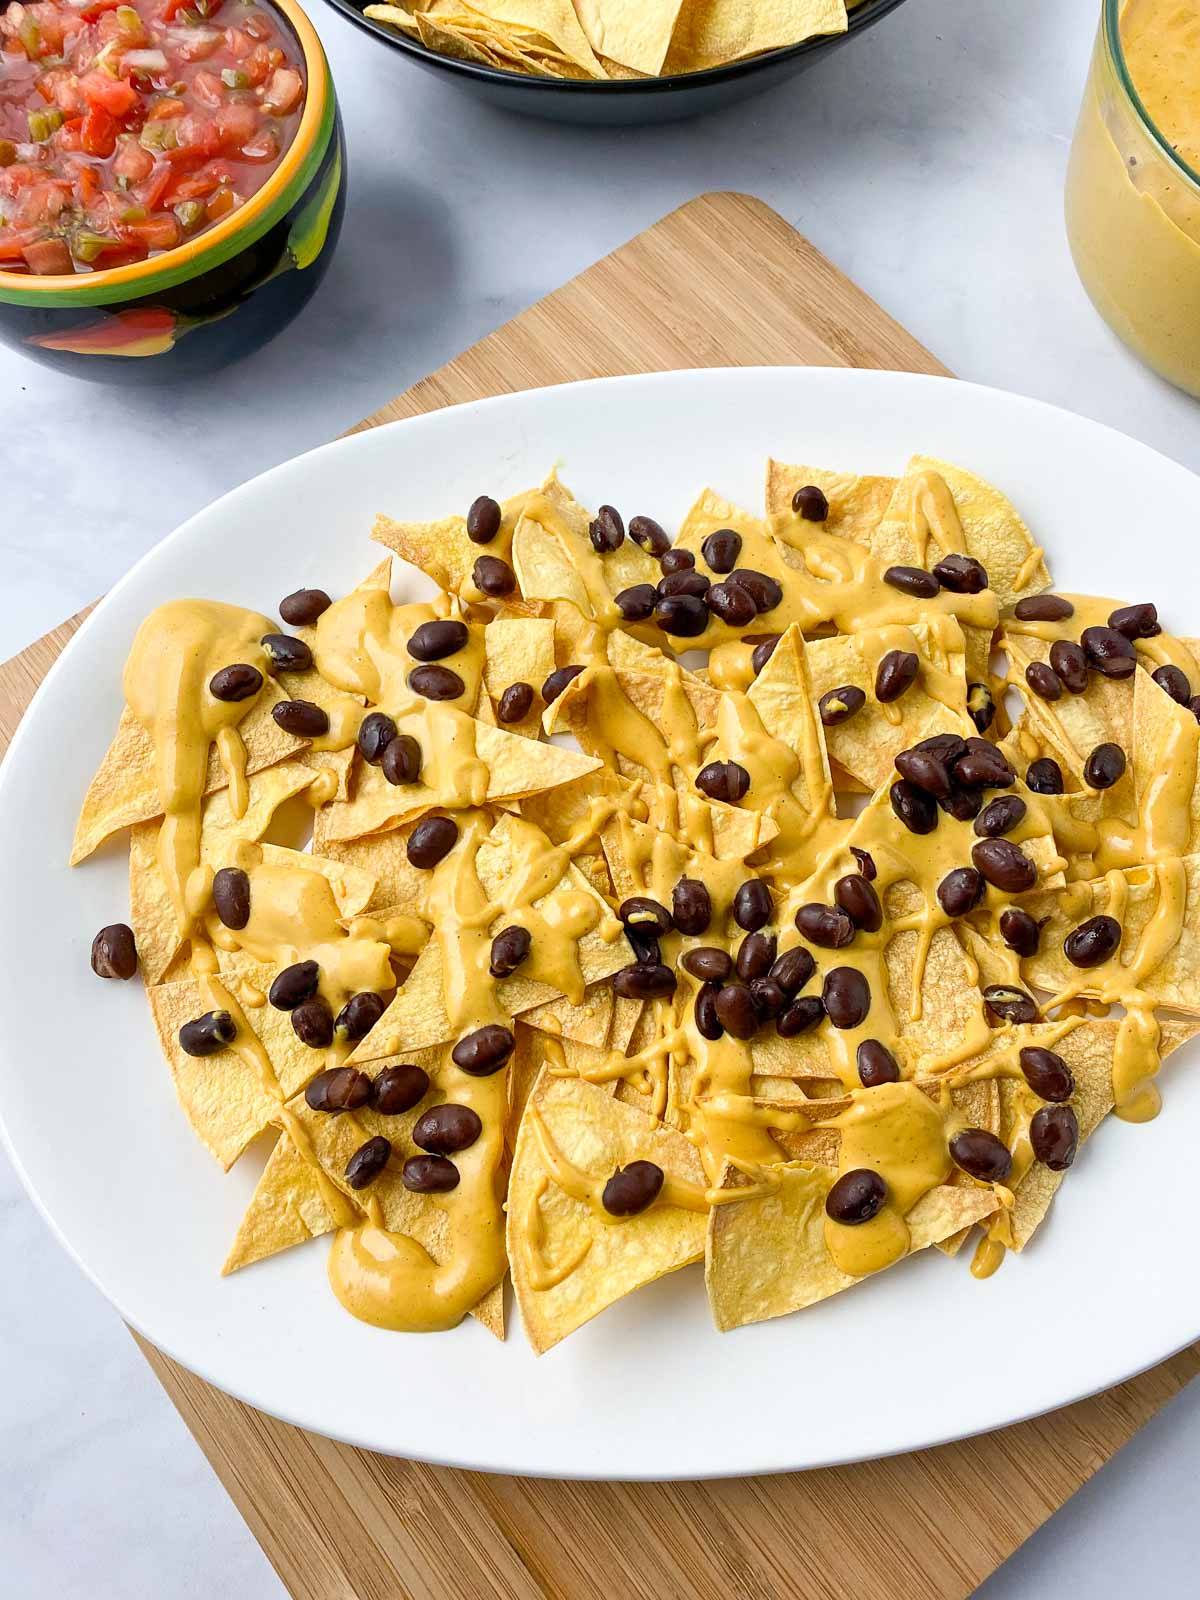 First layer of tortilla chips, cheese sauce, and black beans on nacho platter.